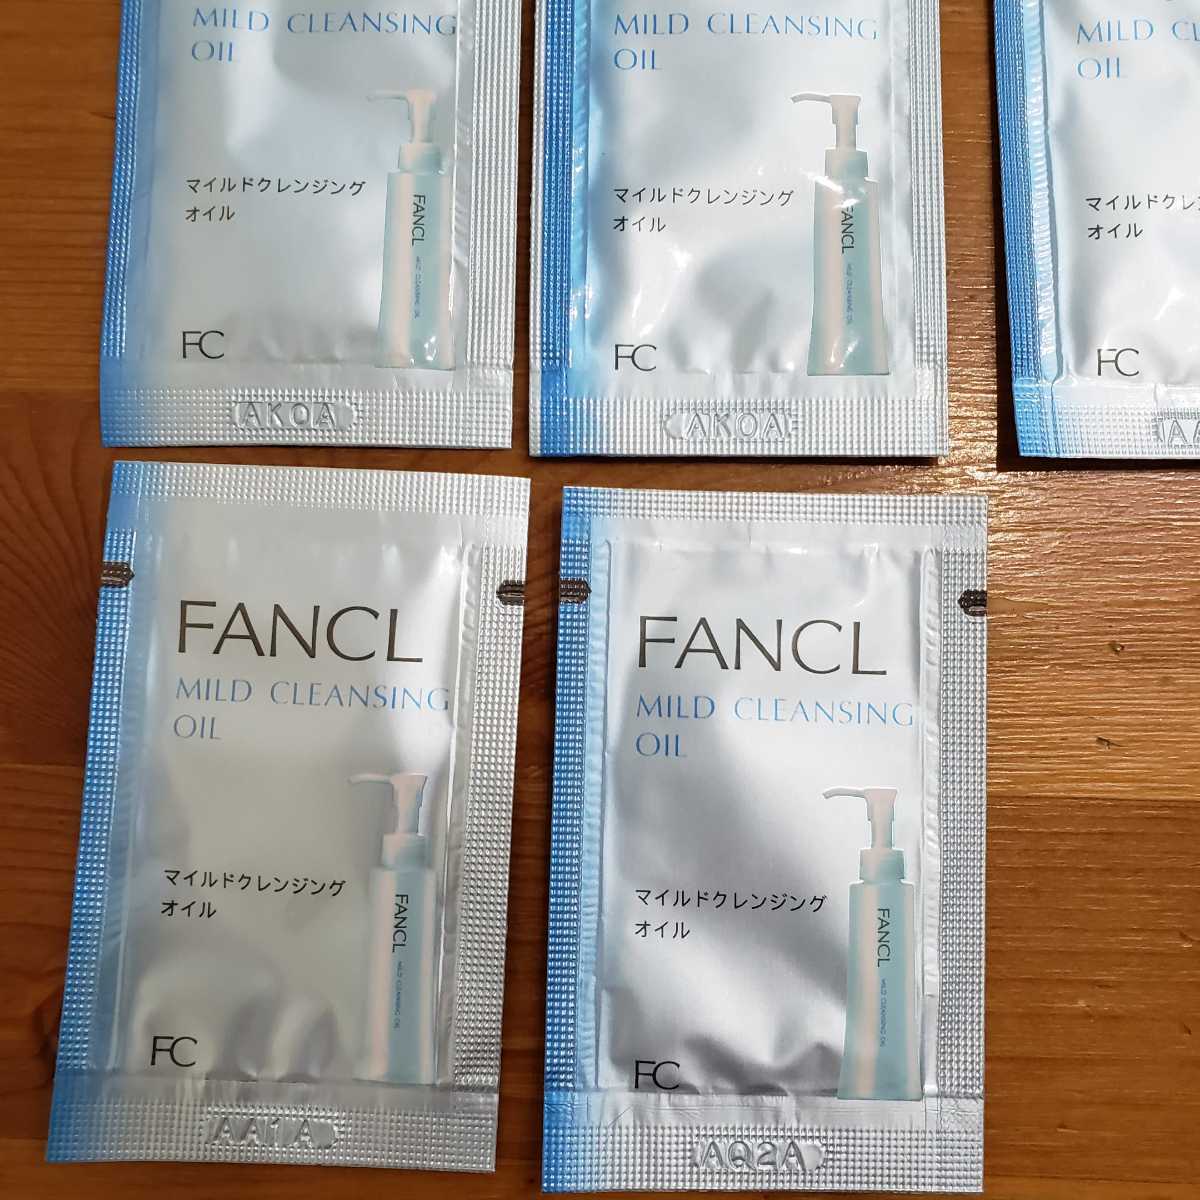 FANCL Fancl mild cleansing oil sample total 13. oil cleansing make-up dropping 